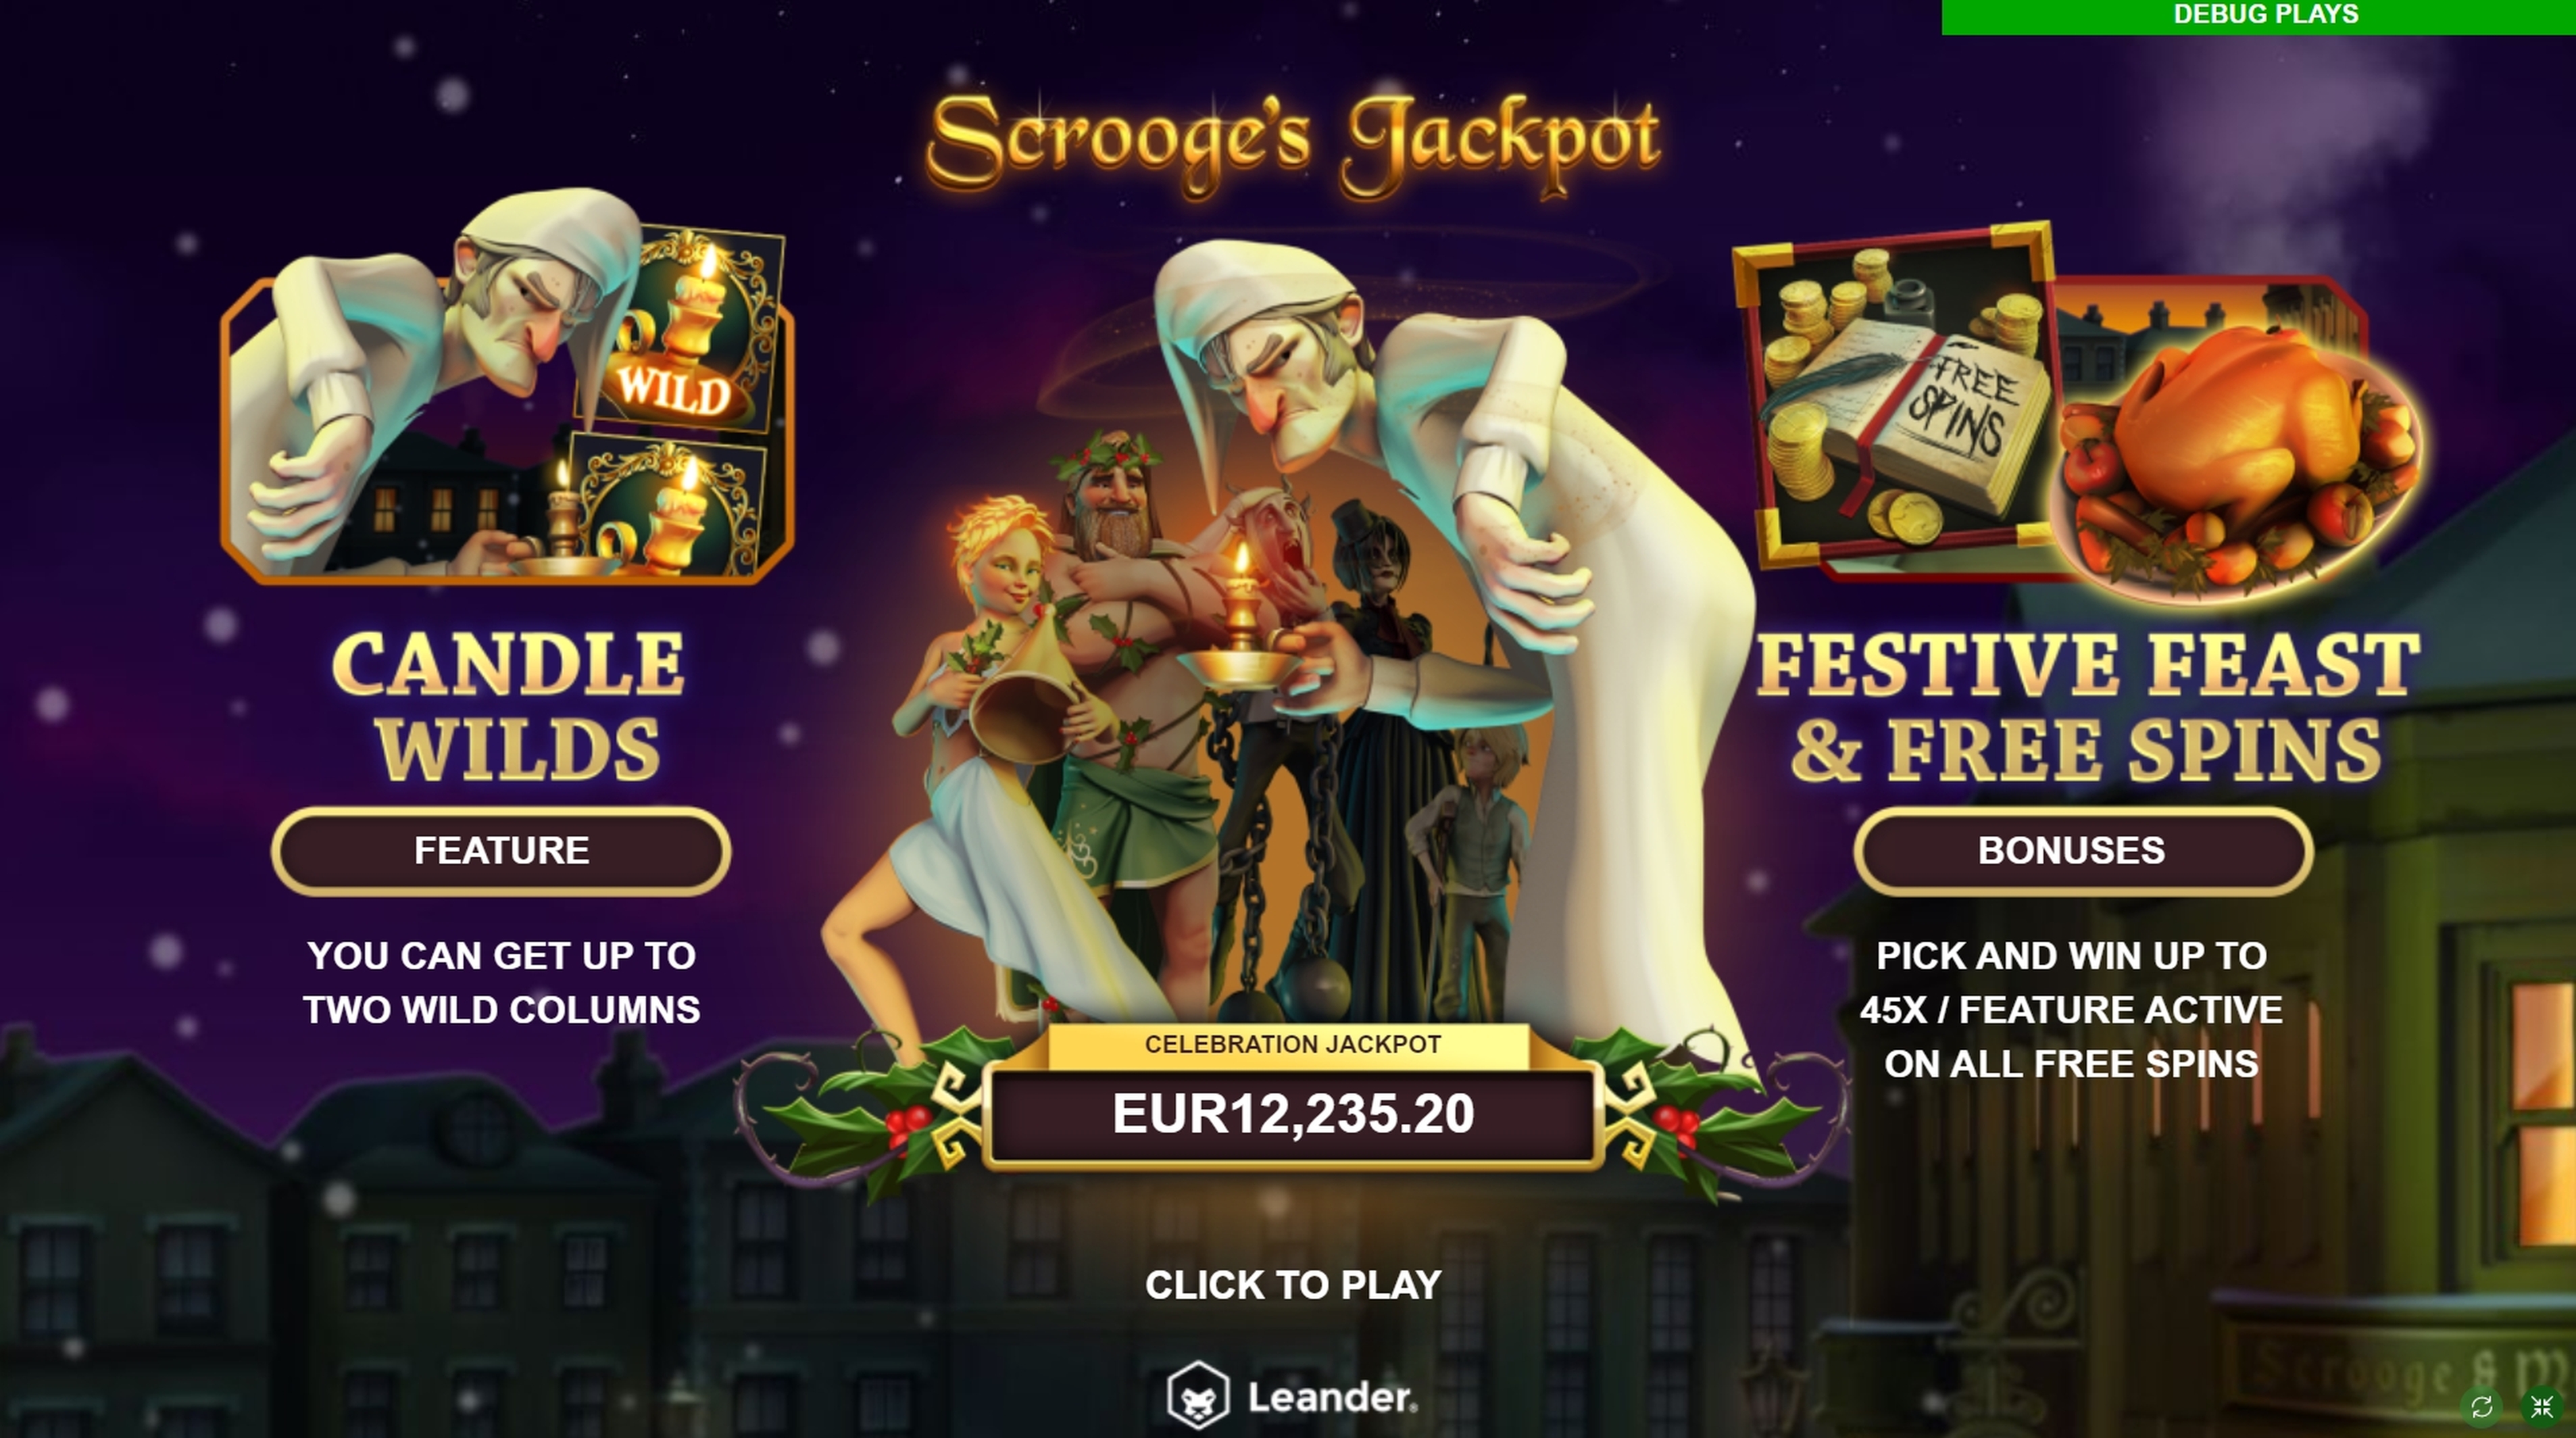 Play Scrooge's Jackpot Free Casino Slot Game by Leander Games